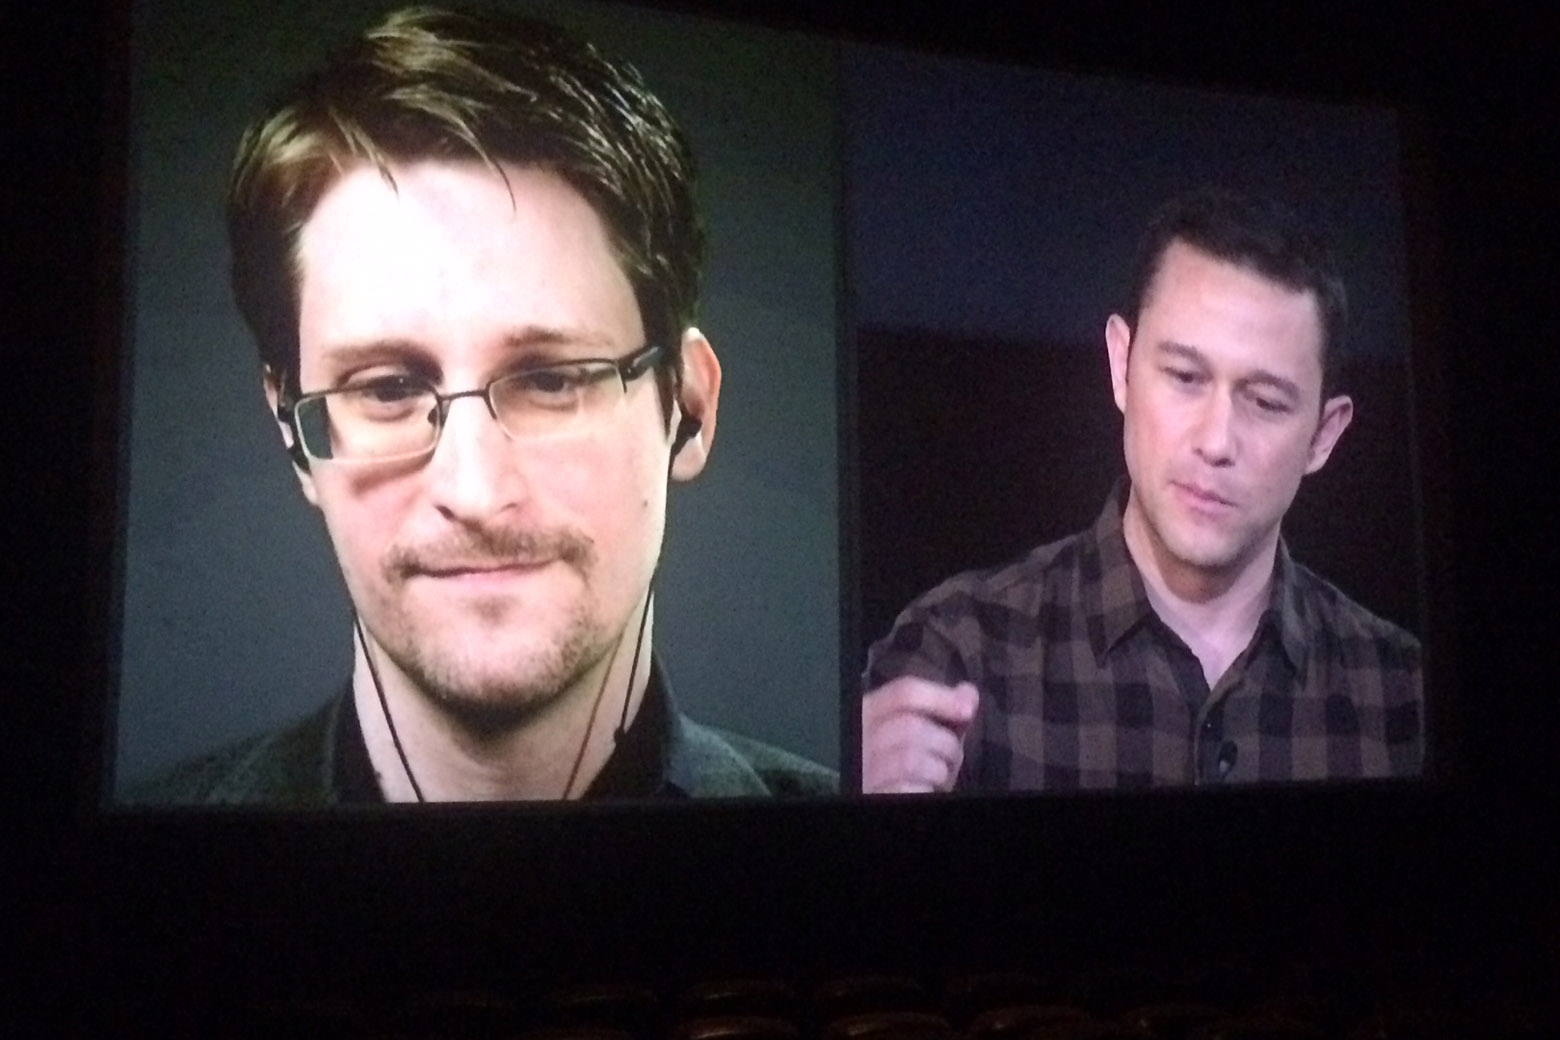 Edward Snowden video conferences (left) with Joseph Gordon-Levitt (right) during "Snowden Live" at AMC Mazza Gallerie in Washington D.C. (WTOP/Jason Fraley)